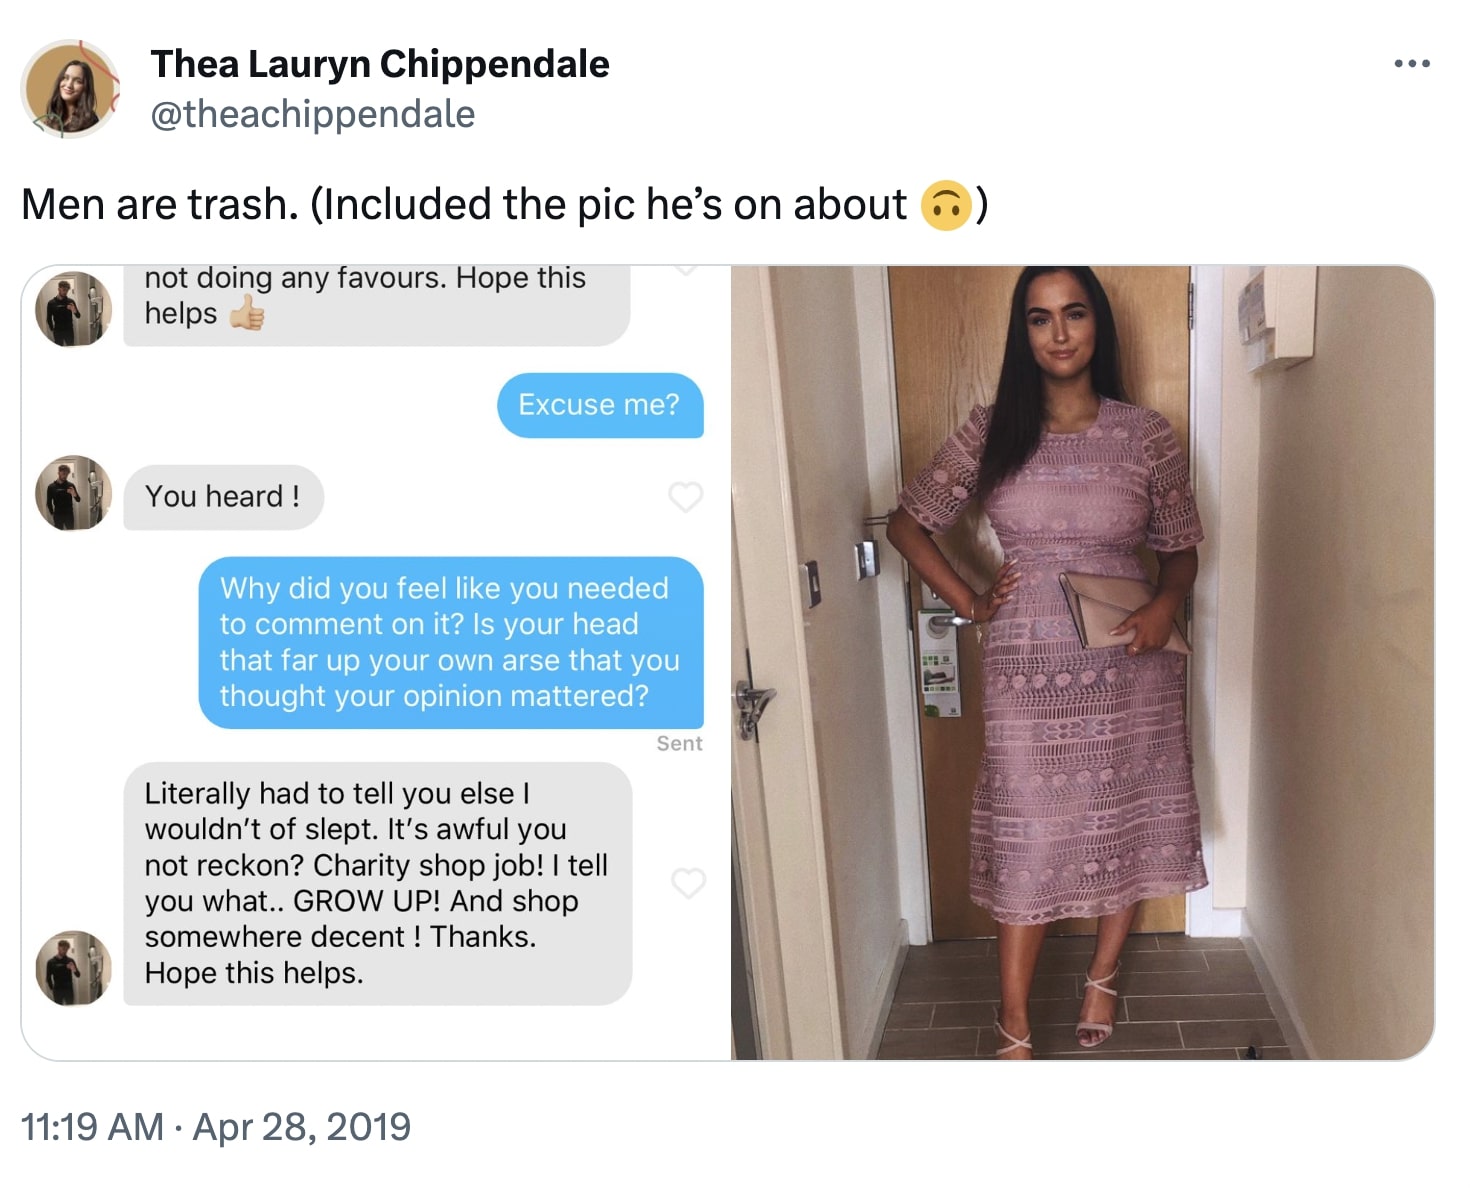 Thea Lauryn Chippendale's post on X with screenshot of Tinder conversation and image of her in ASOS dress